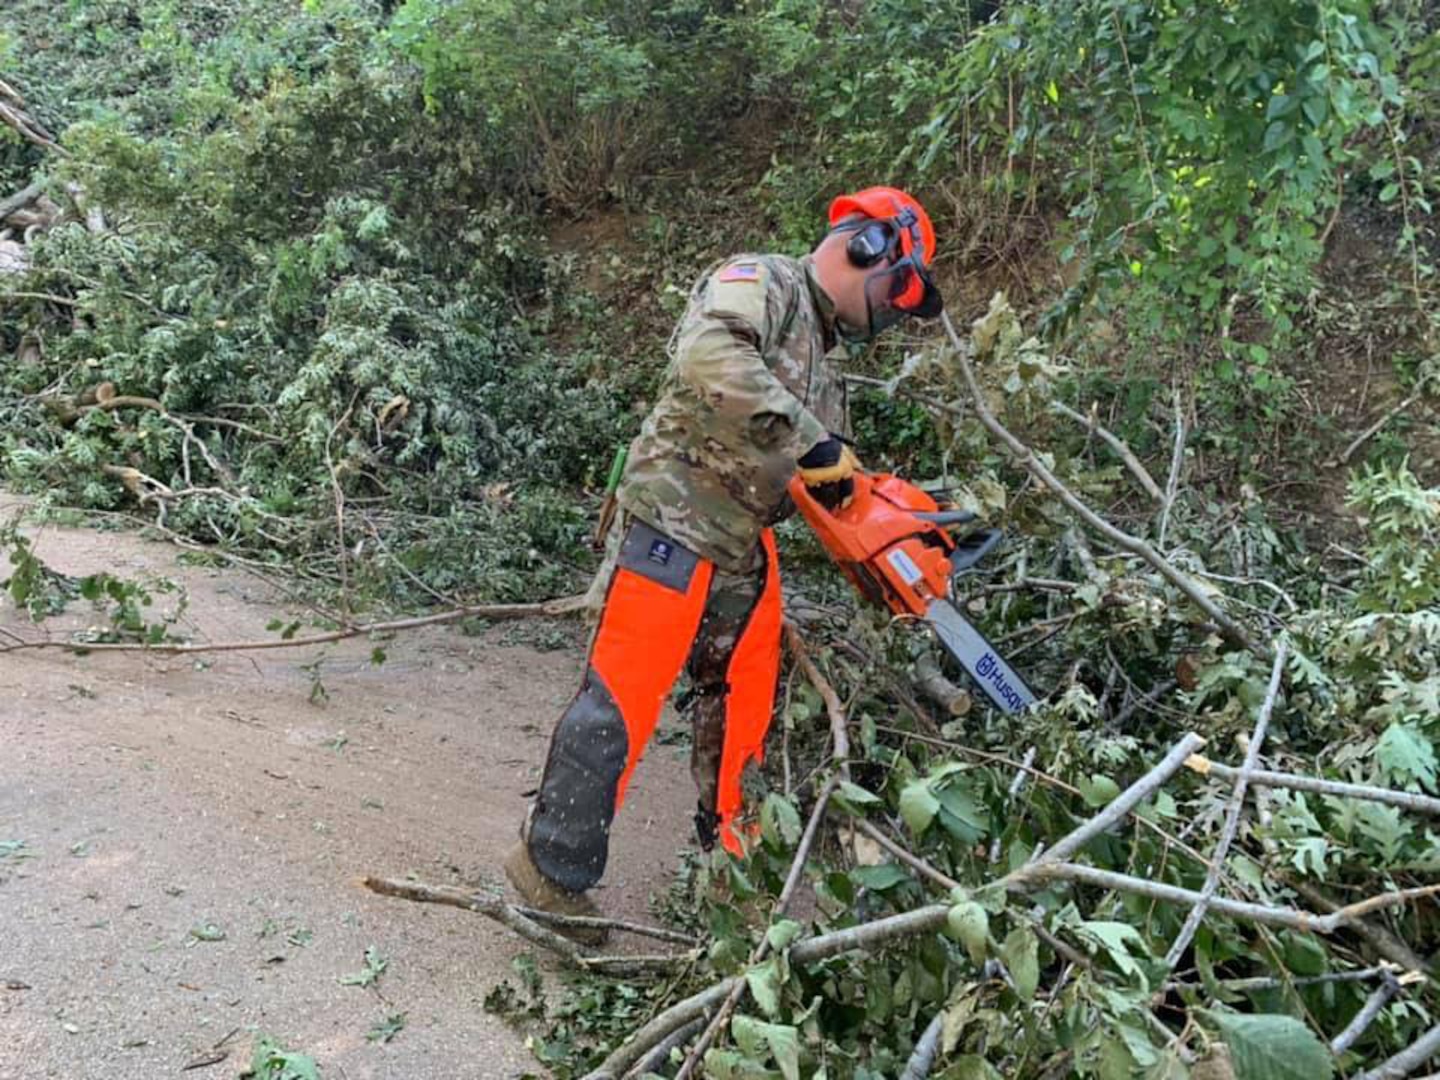 Iowa National Guard Soldiers with the 831st Engineer Company
worked Aug. 15-16, 2020, to clear downed trees to reach a substation that supplies power to parts of Cedar Rapids. An Aug. 10 derecho caused widespread damage in the area.